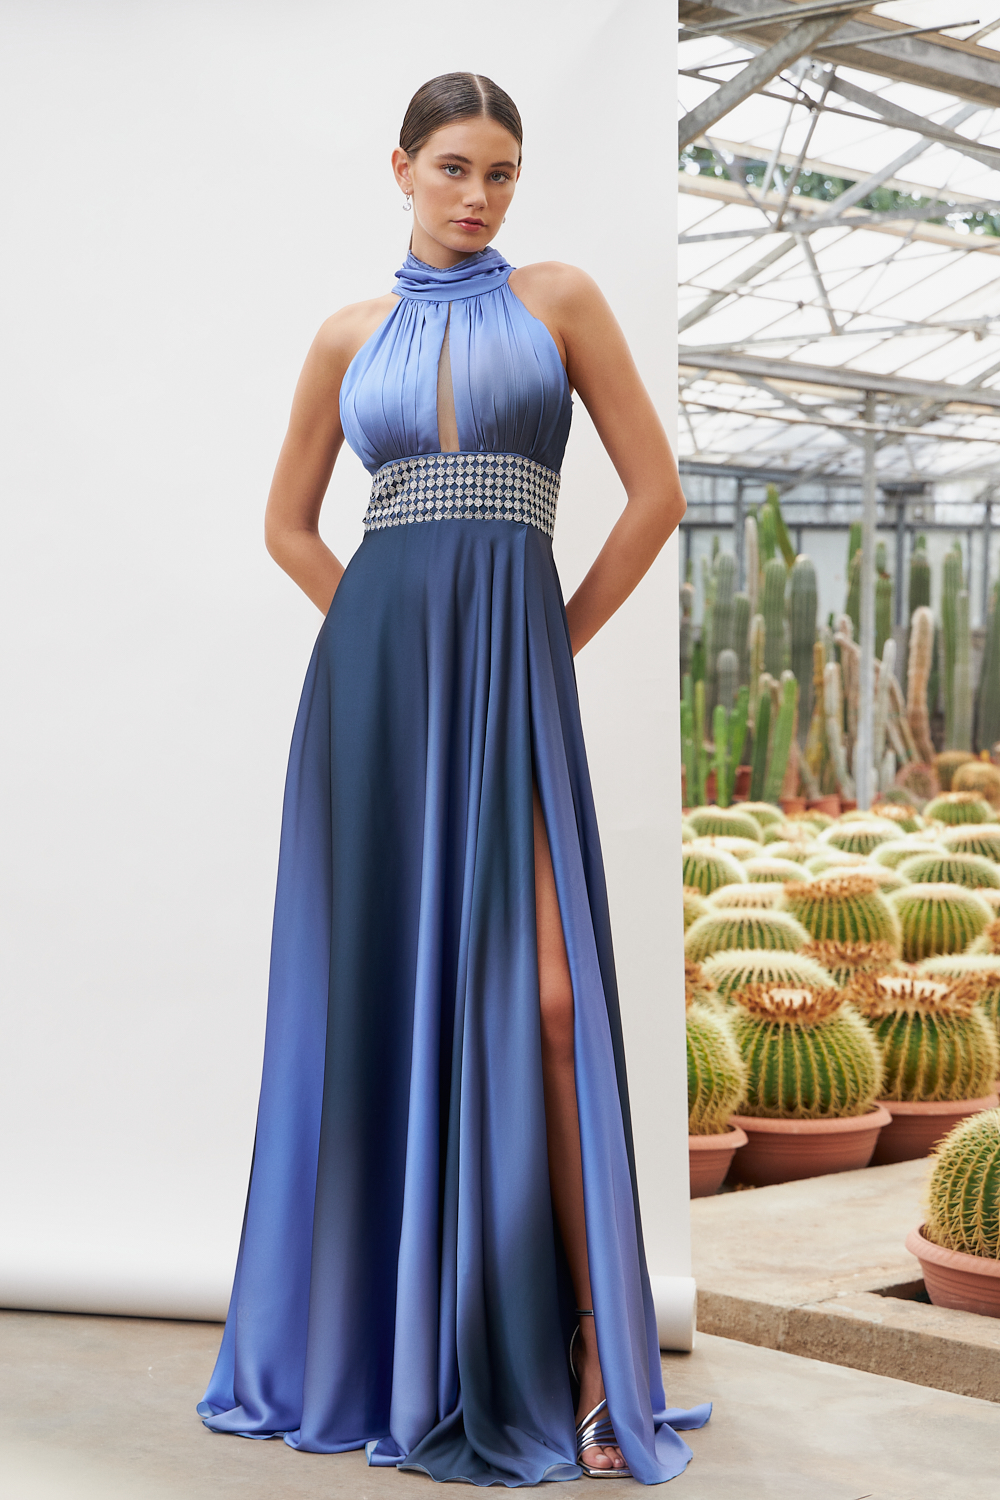 Cocktail Dresses / Long cocktail satin dress with beading at the waist and open back